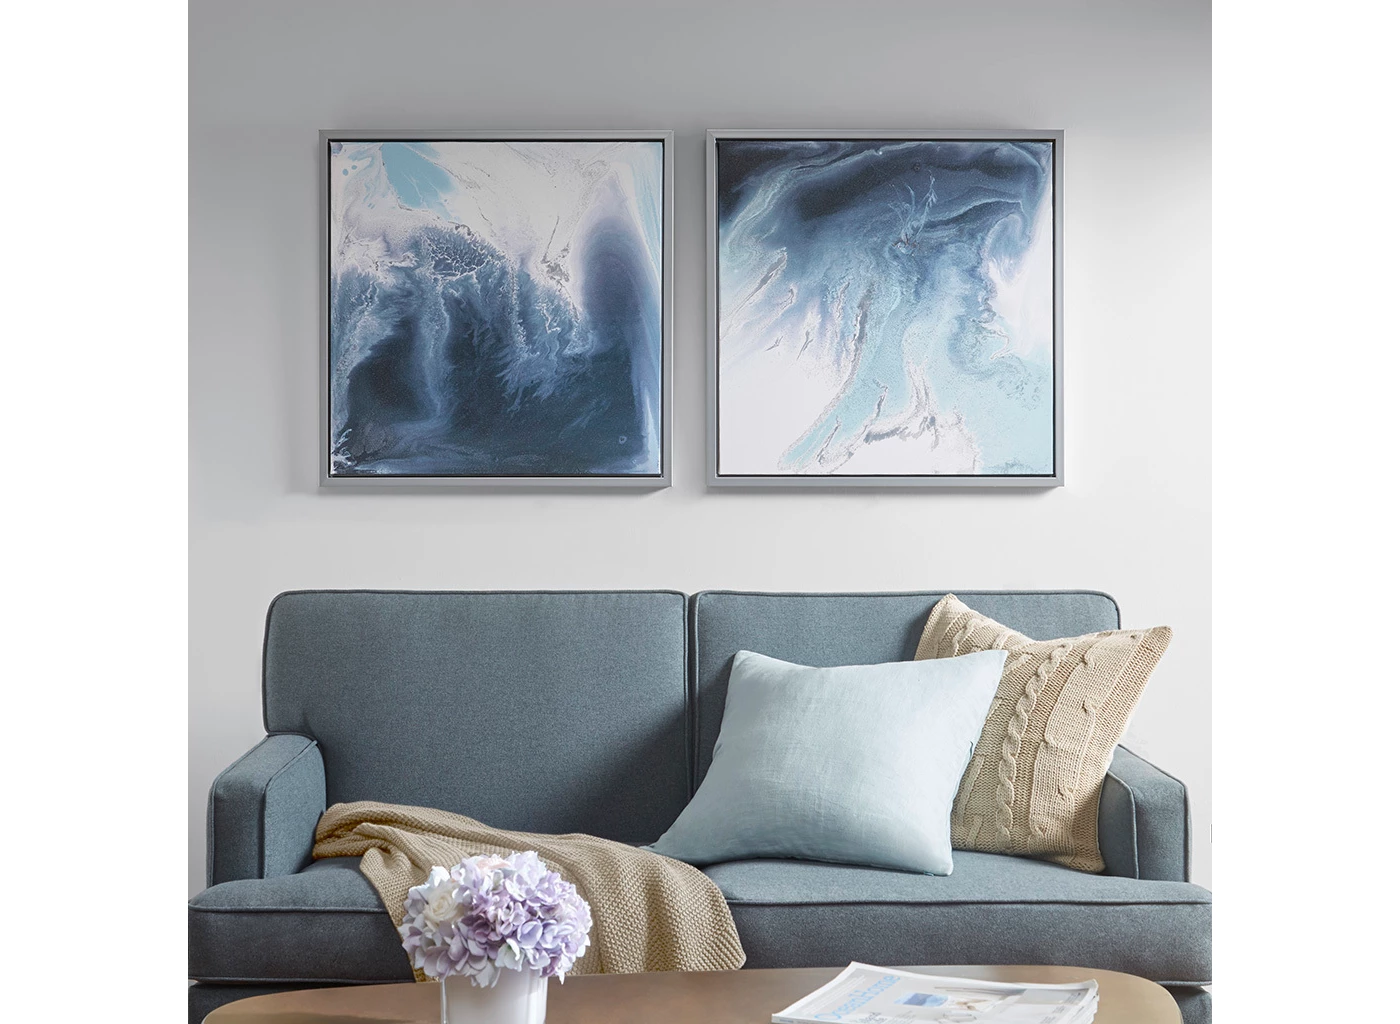 Relaxing and calming wall art from a Therapy Office Blog - www.stylebymimig.com